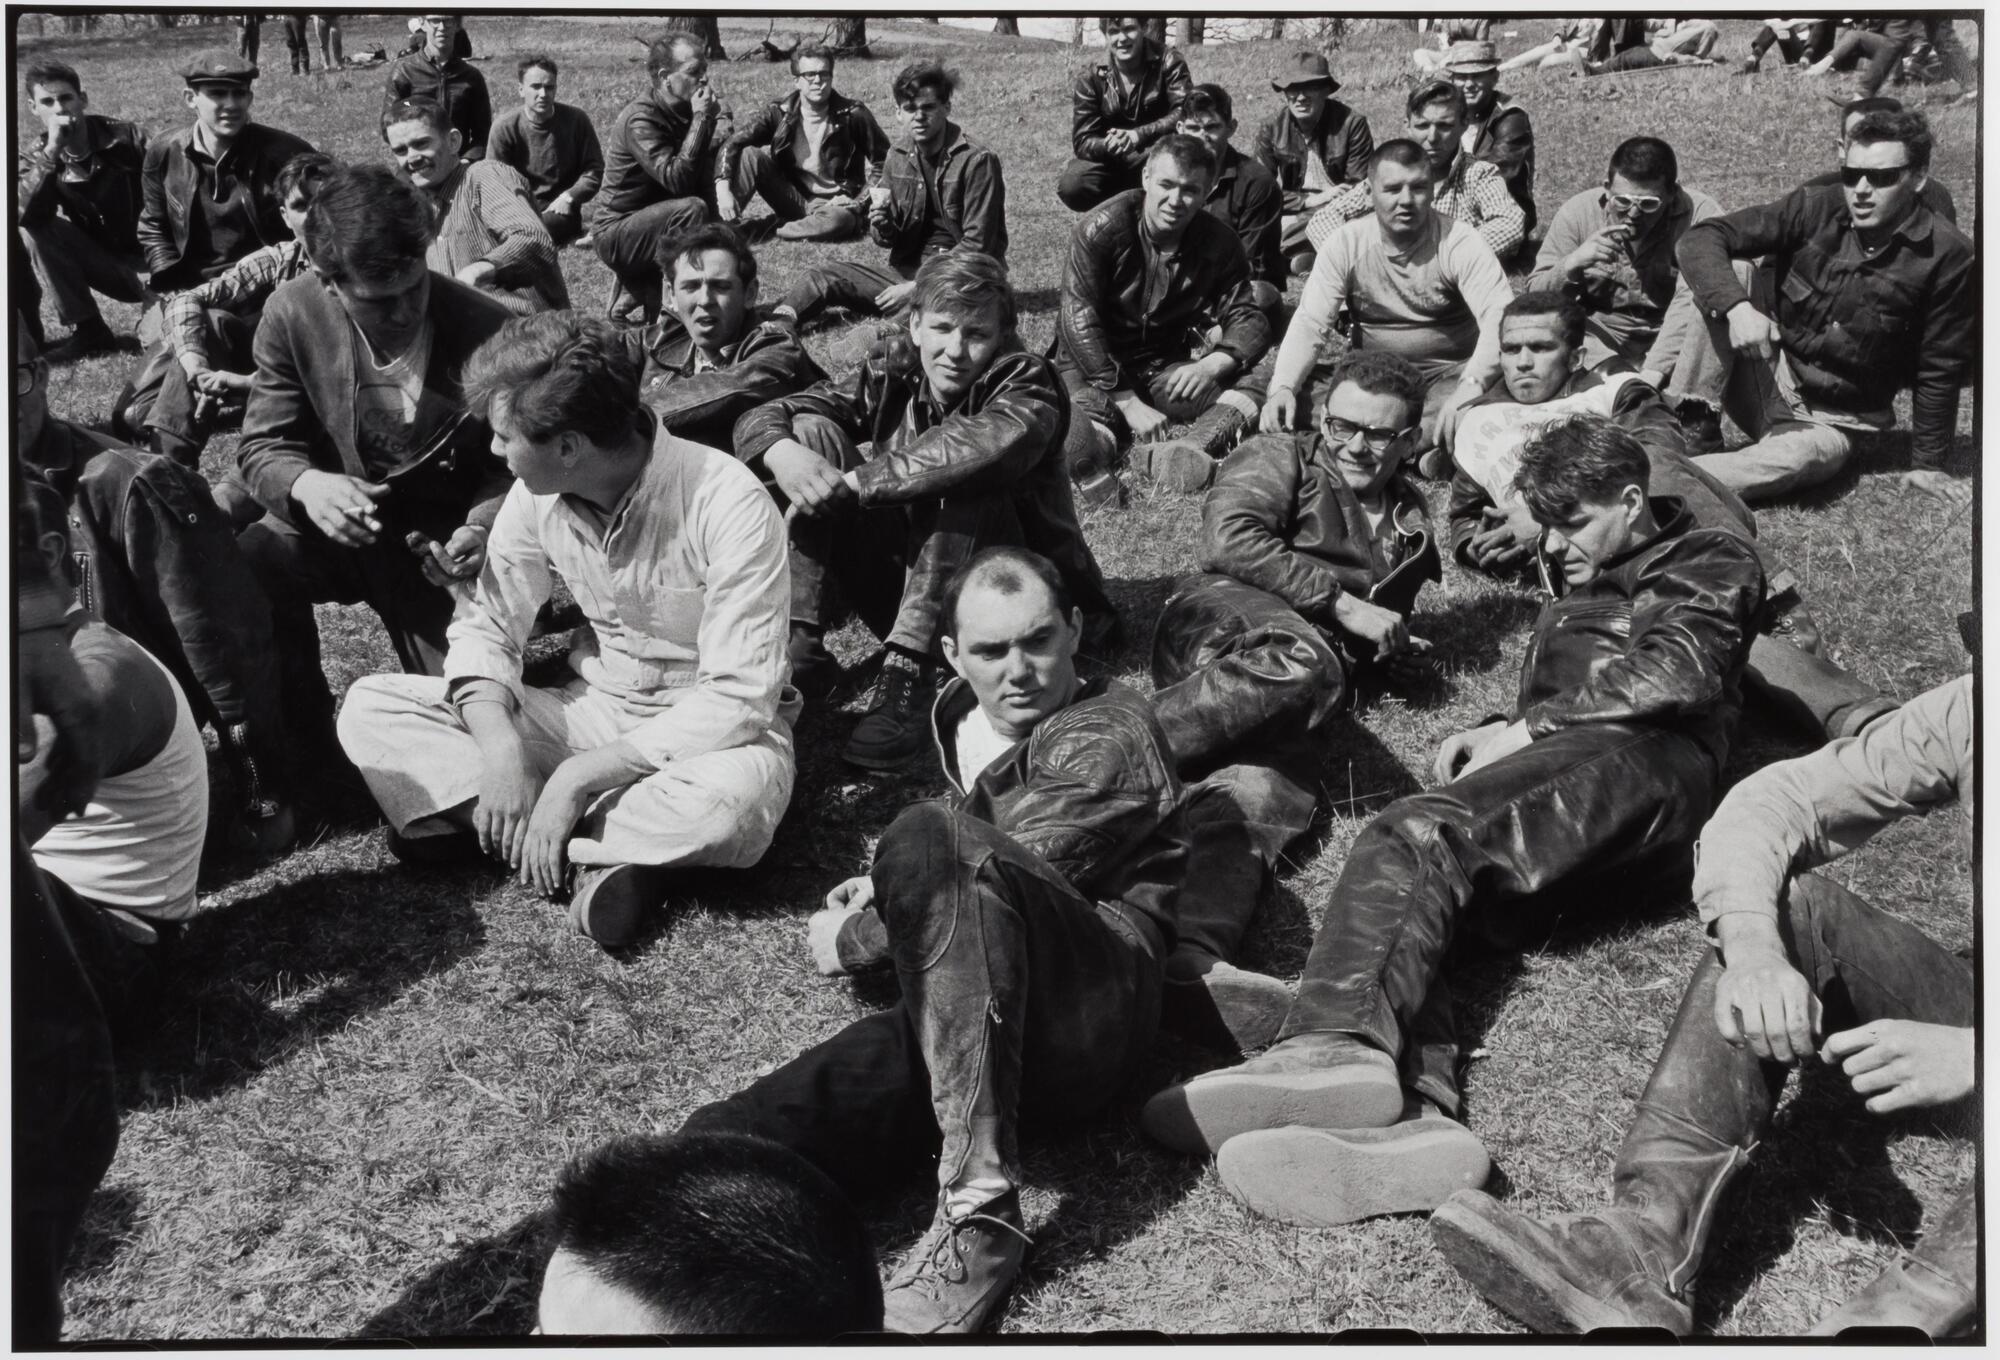 A photograph of a large group of men on a grassy lawn. Many wear leather jackets, jeans, and recline or sit cross-legged.